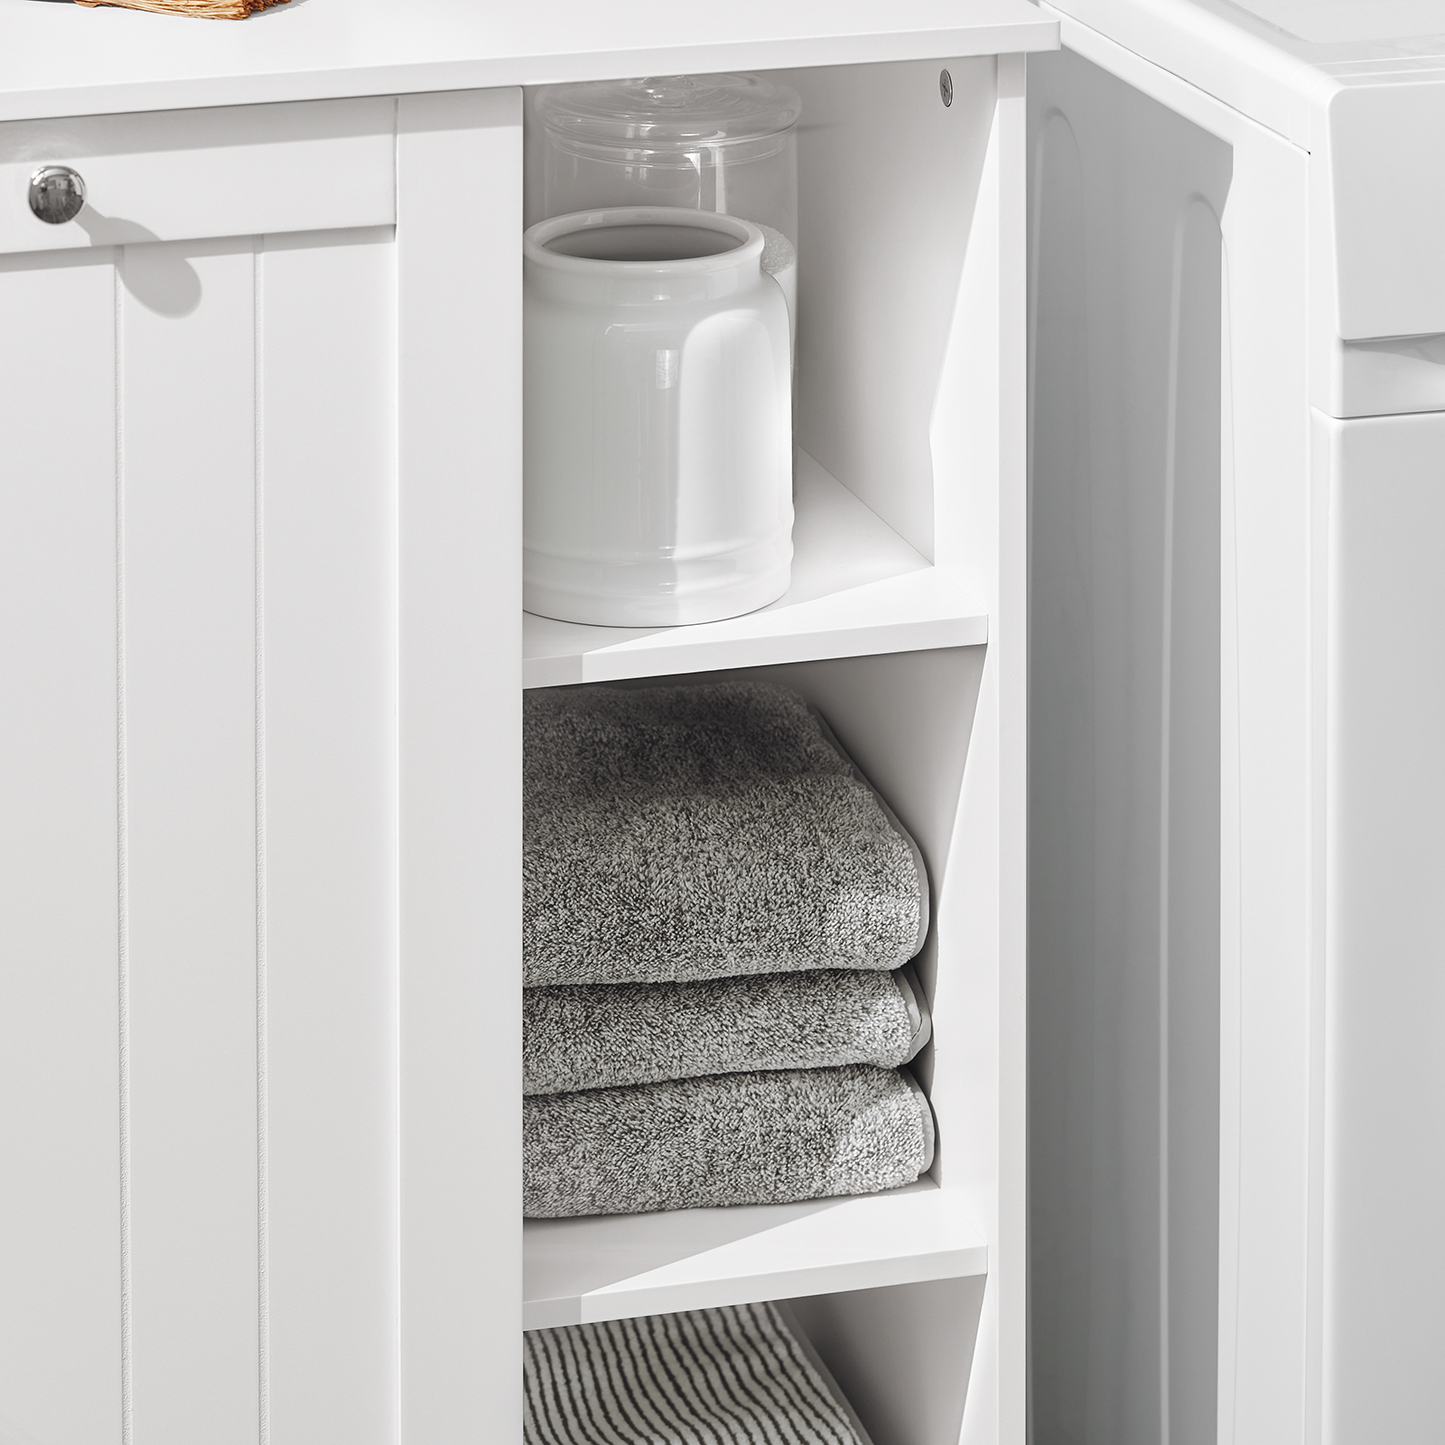 SoBuy Laundry Cabinet Chest Bathroom Storage Cabinet with Basket